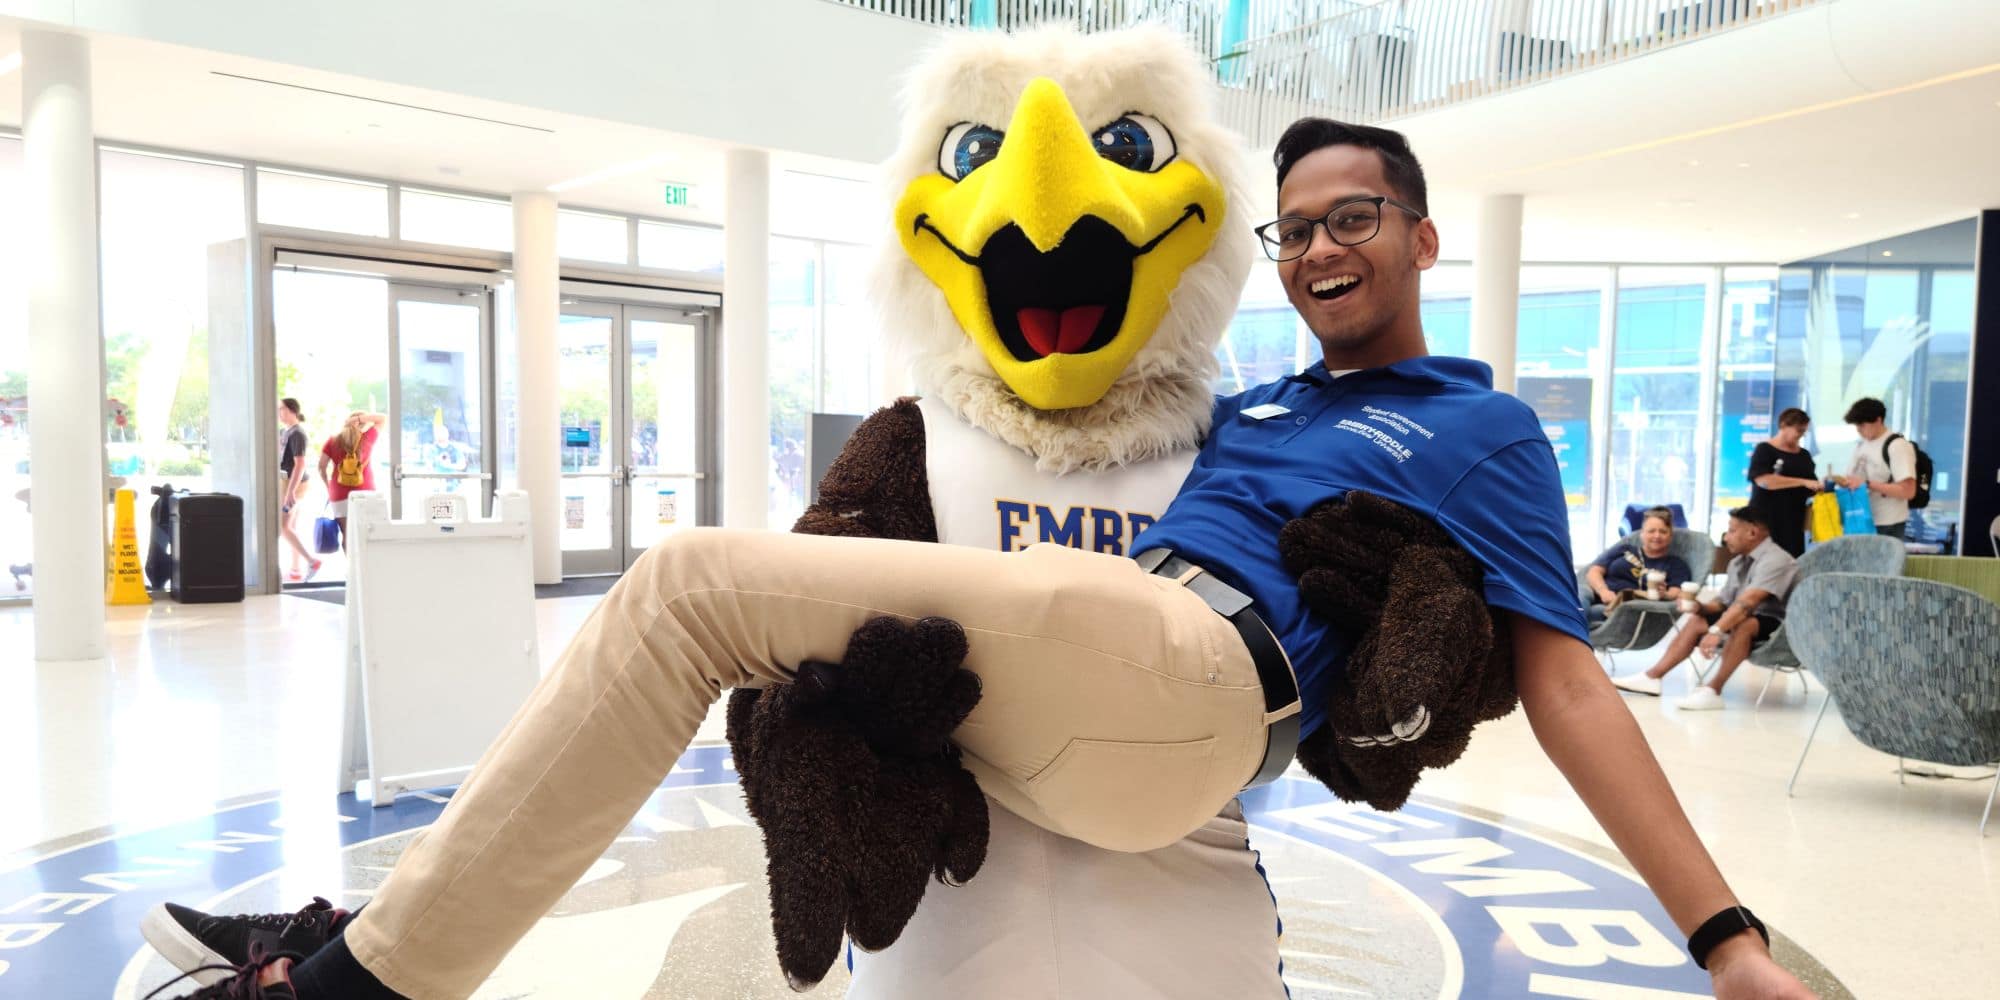 During an Avion event in the Student Union, Dylan Kowlessar gets carried away with Ernie the Eagle. (Photo: Erin Dillman)